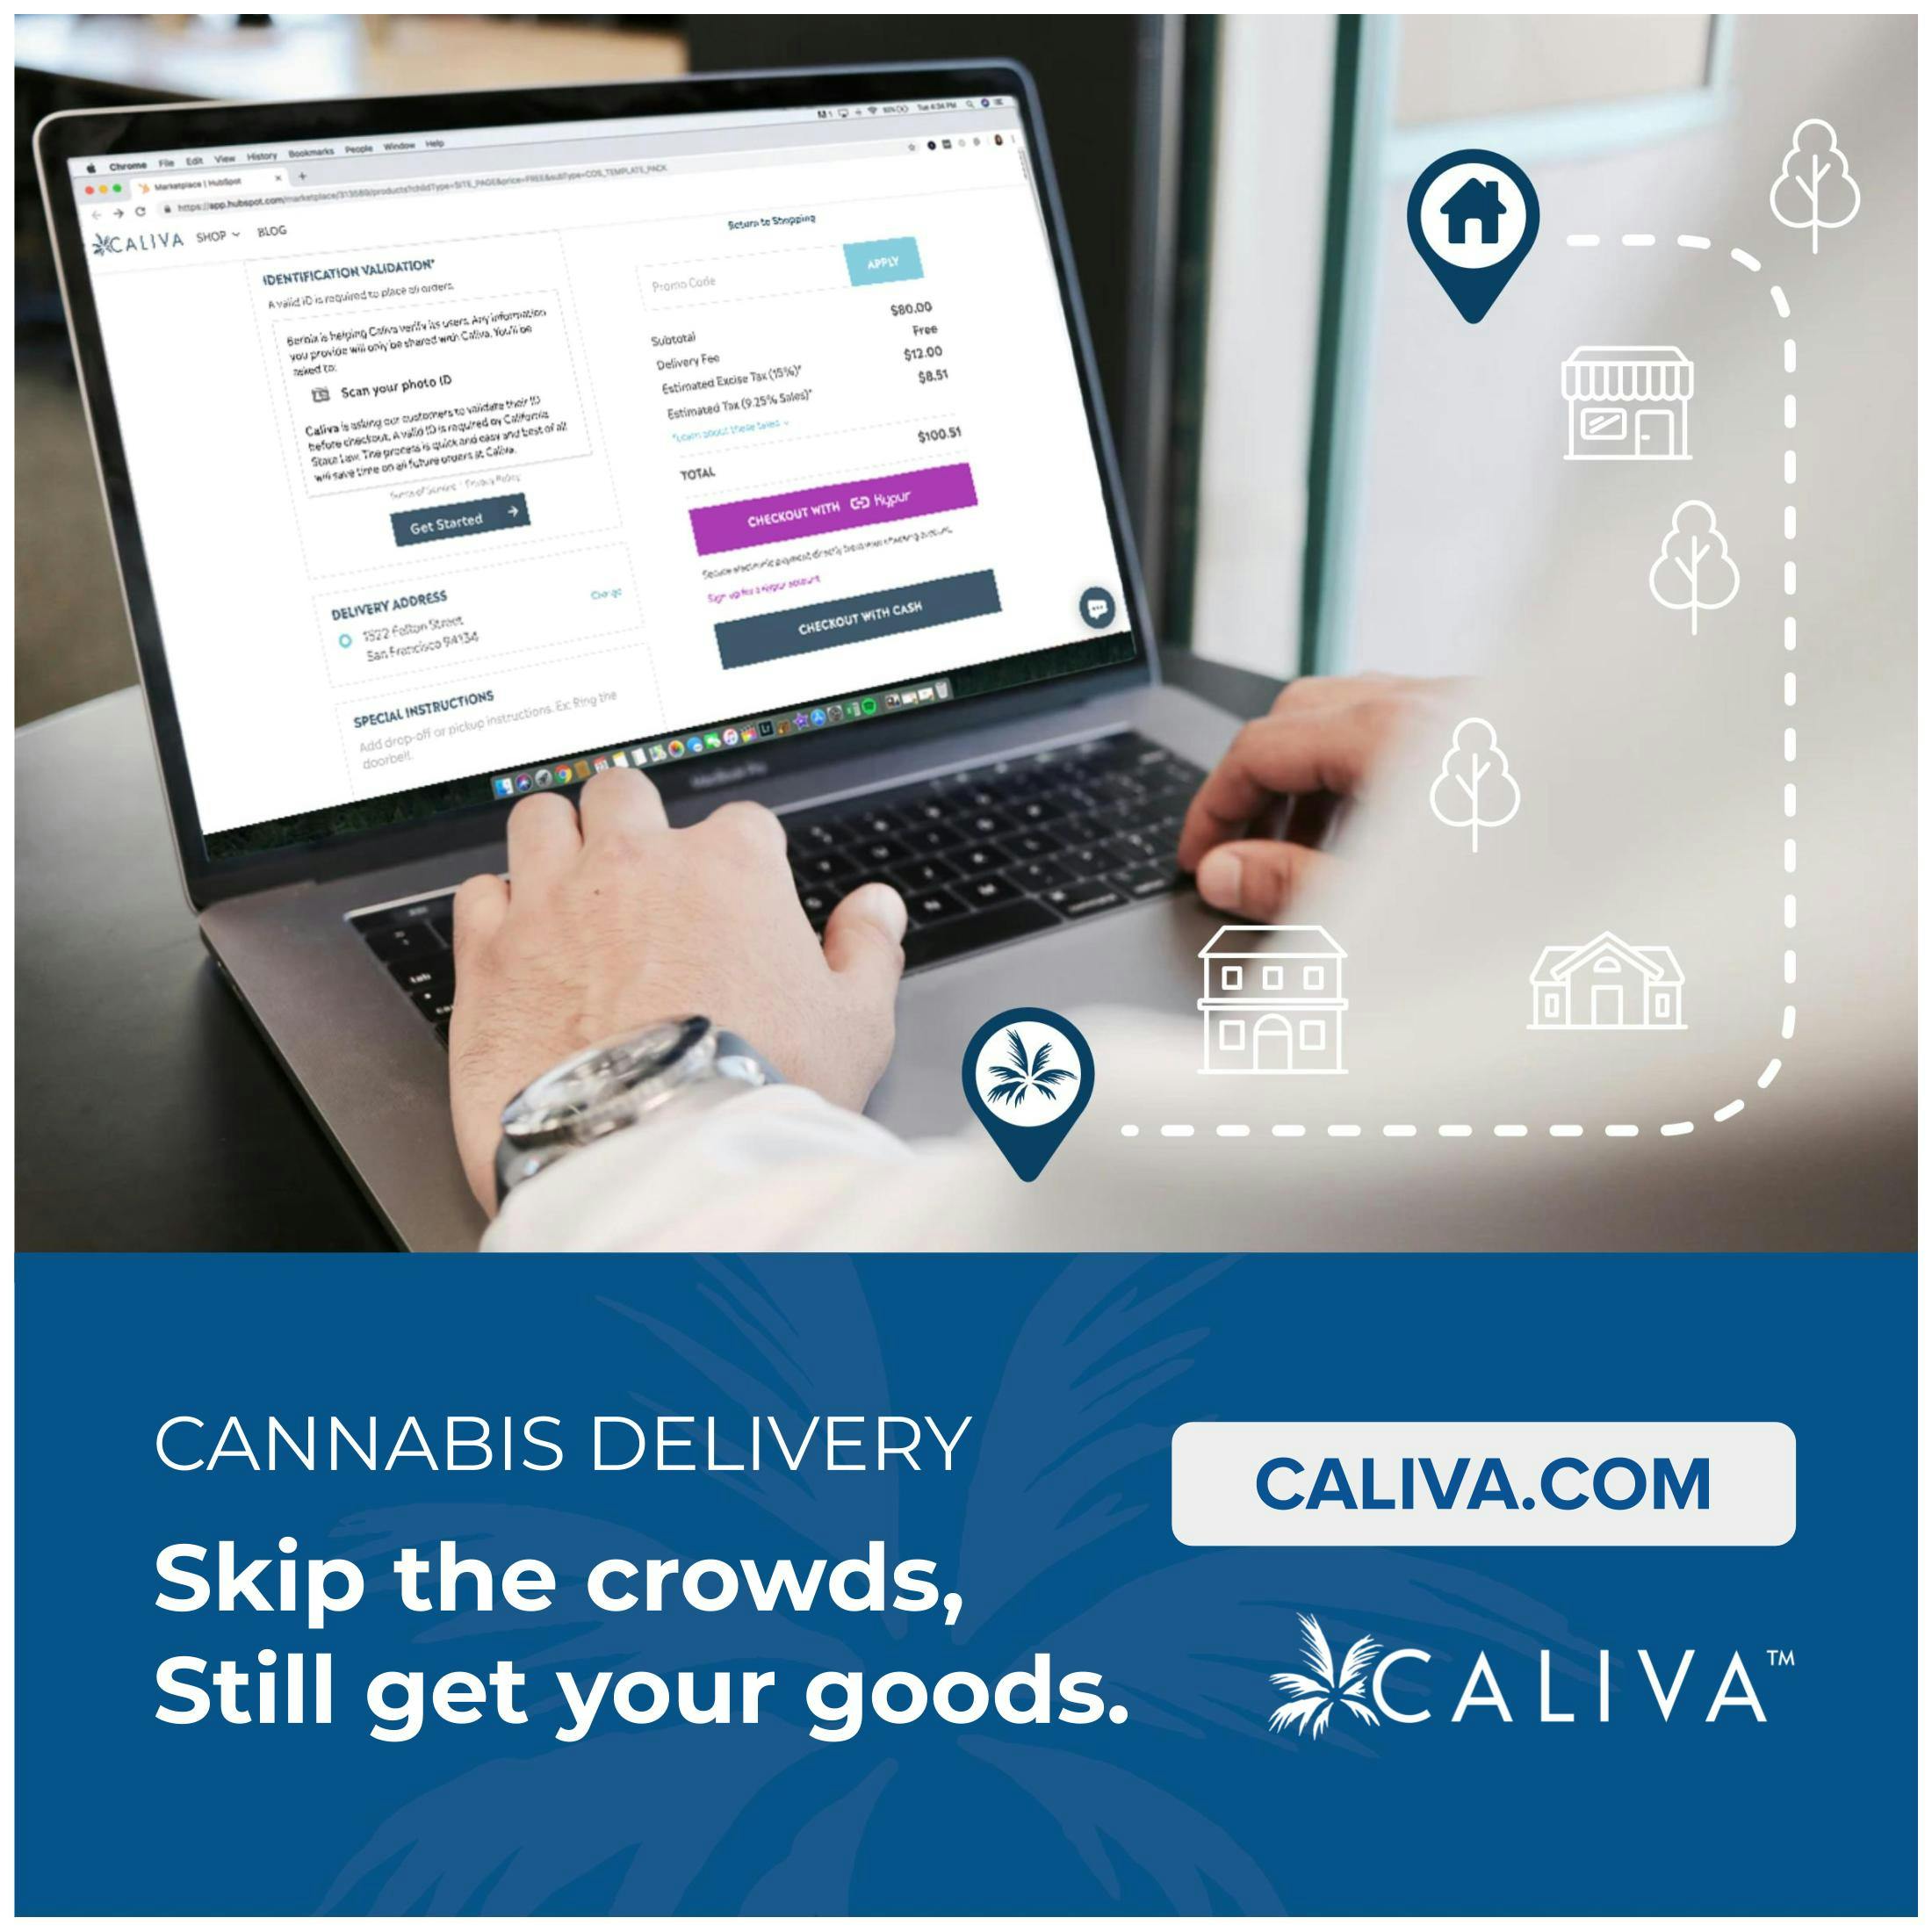 A customer skipping crowds and ordering directly from Caliva.com.